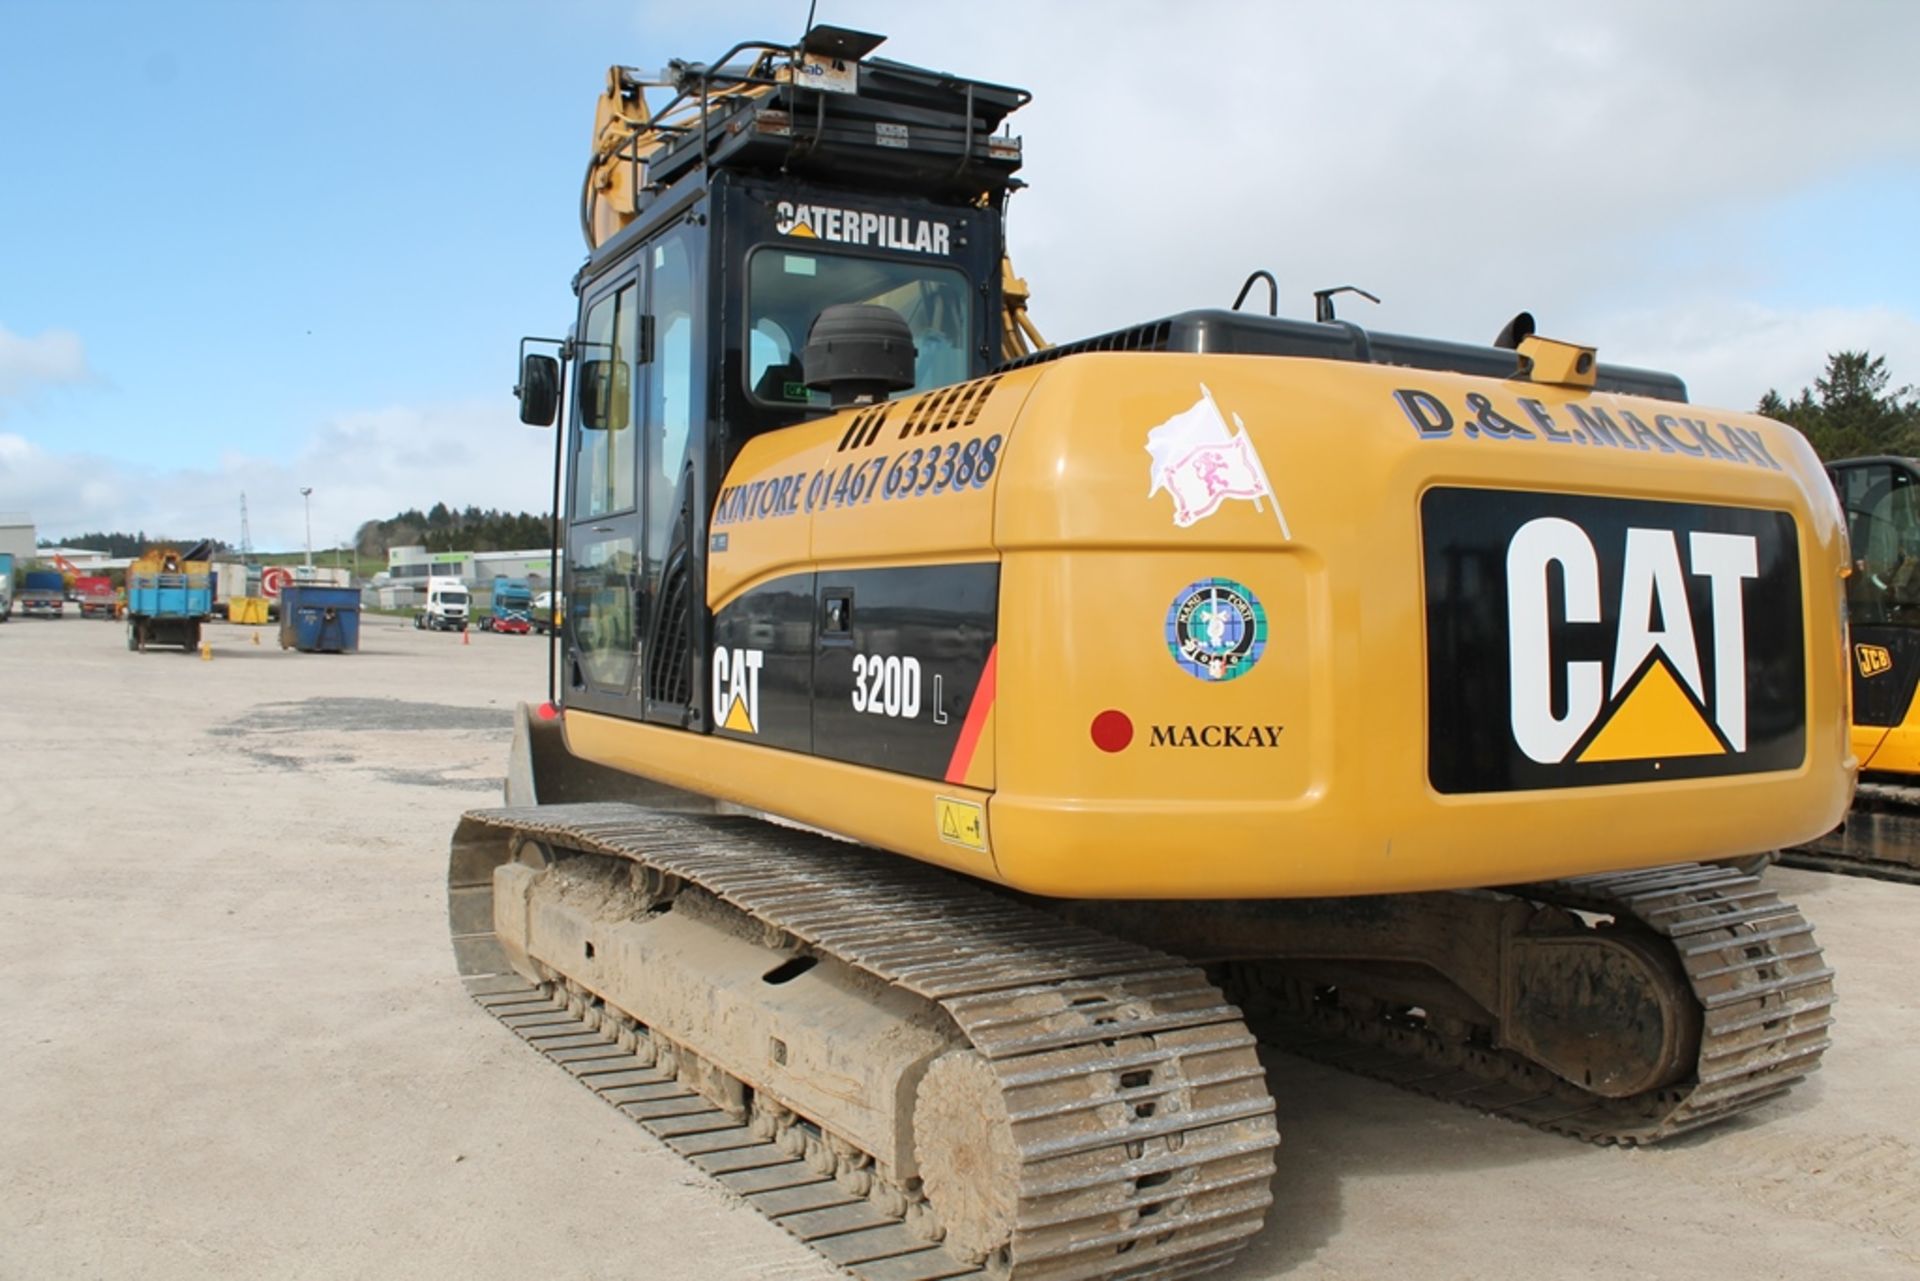 CATERPILLAR 320DL, NOV- 2010, 9108HRS, New tracks & sprockets fitted March 2016, PLUS VAT, , H - Image 6 of 9